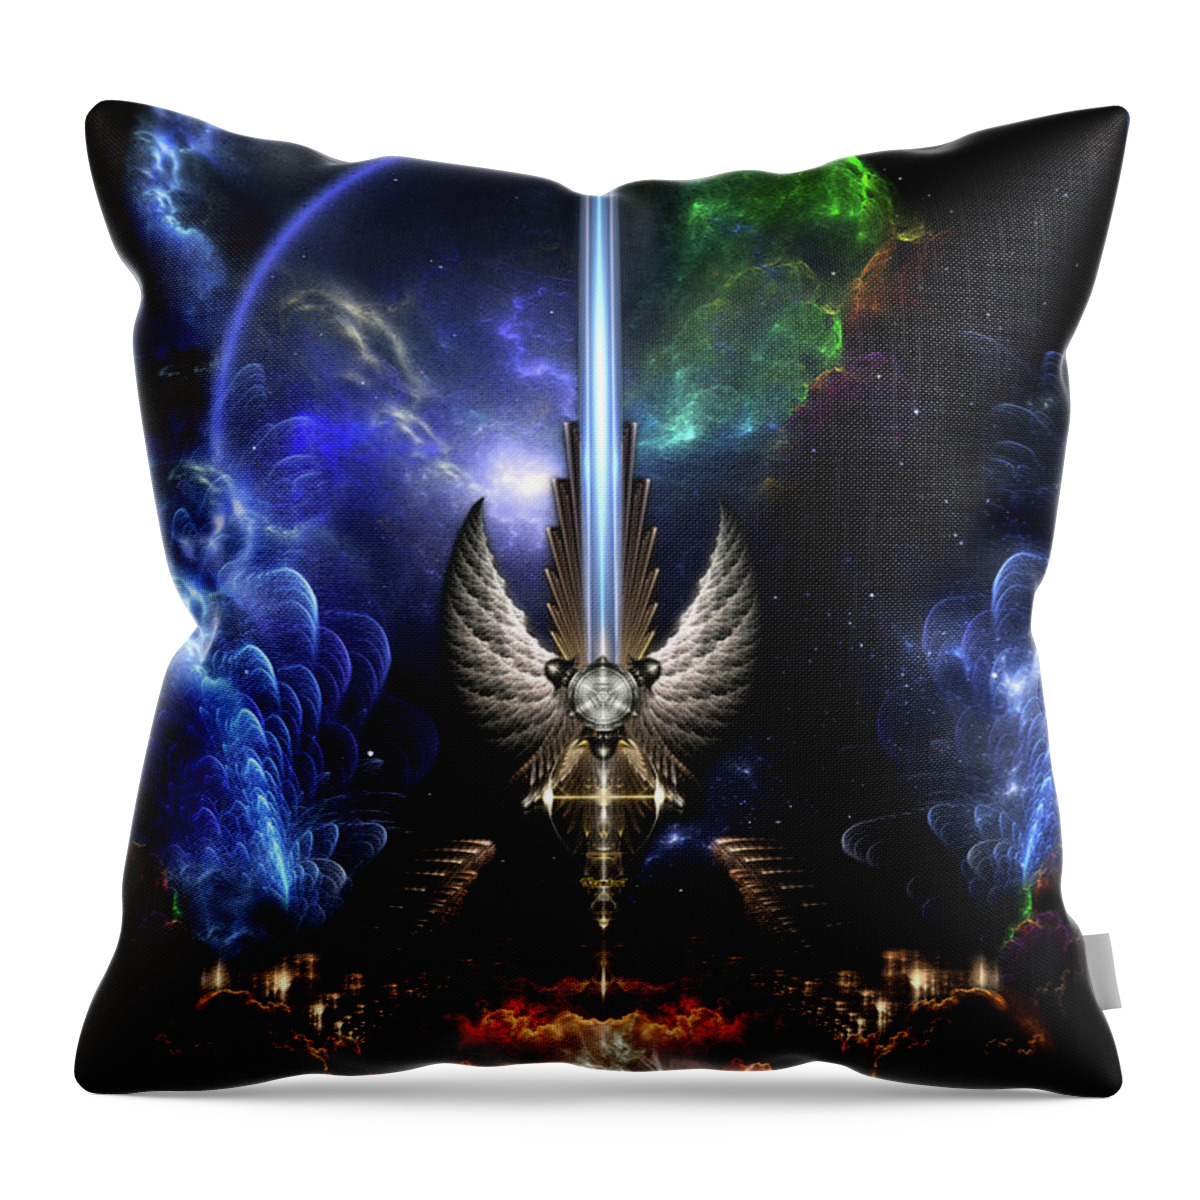 Angel Wing Sword Of Arkledious Throw Pillow featuring the digital art The Angel Wing Sword Of Arkledious Space Fractal Art Composition by Rolando Burbon